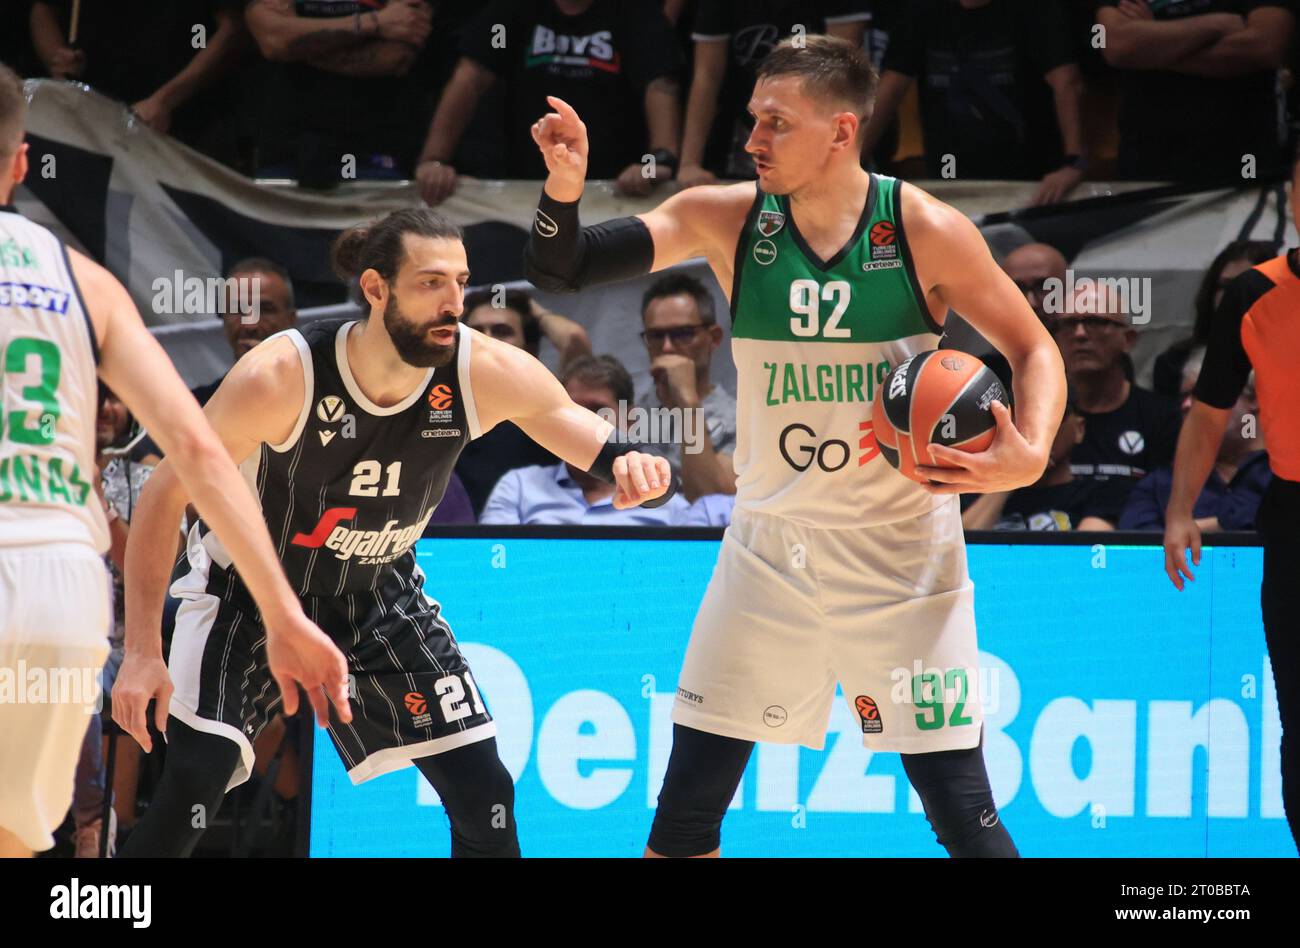 Bologna, Italy. 05th Oct, 2023. q21(R) in action thwarted by Tornike Shengelia (Segafredo Virtus Bologna) during the Euroleague basketball championship match Segafredo Virtus Bologna Vs. Zalgiris Kaunas - Bologna, October 05, 2023 at Paladozza sport palace Credit: Independent Photo Agency/Alamy Live News Stock Photo